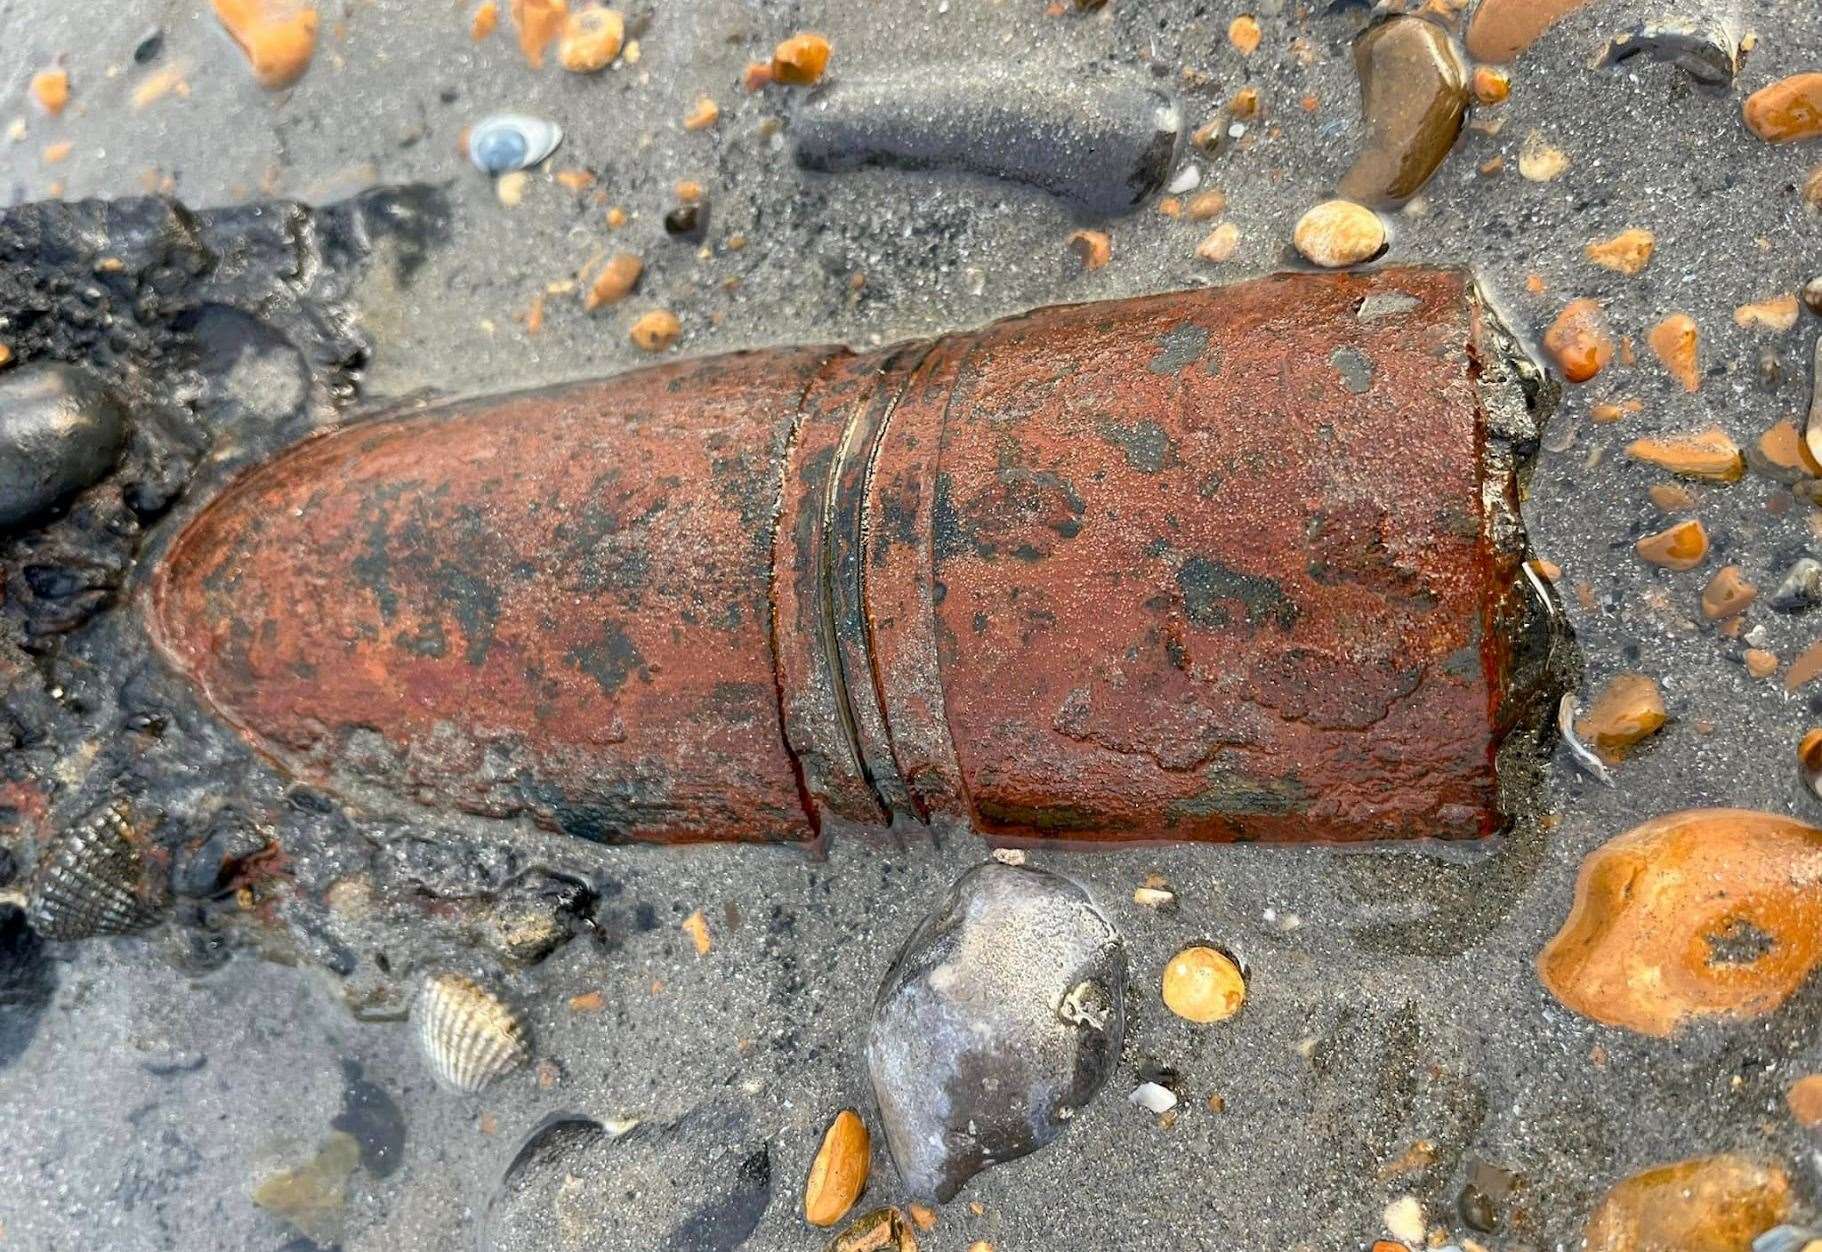 The bomb squad was called out to Sandwich Bay to dispose of the object